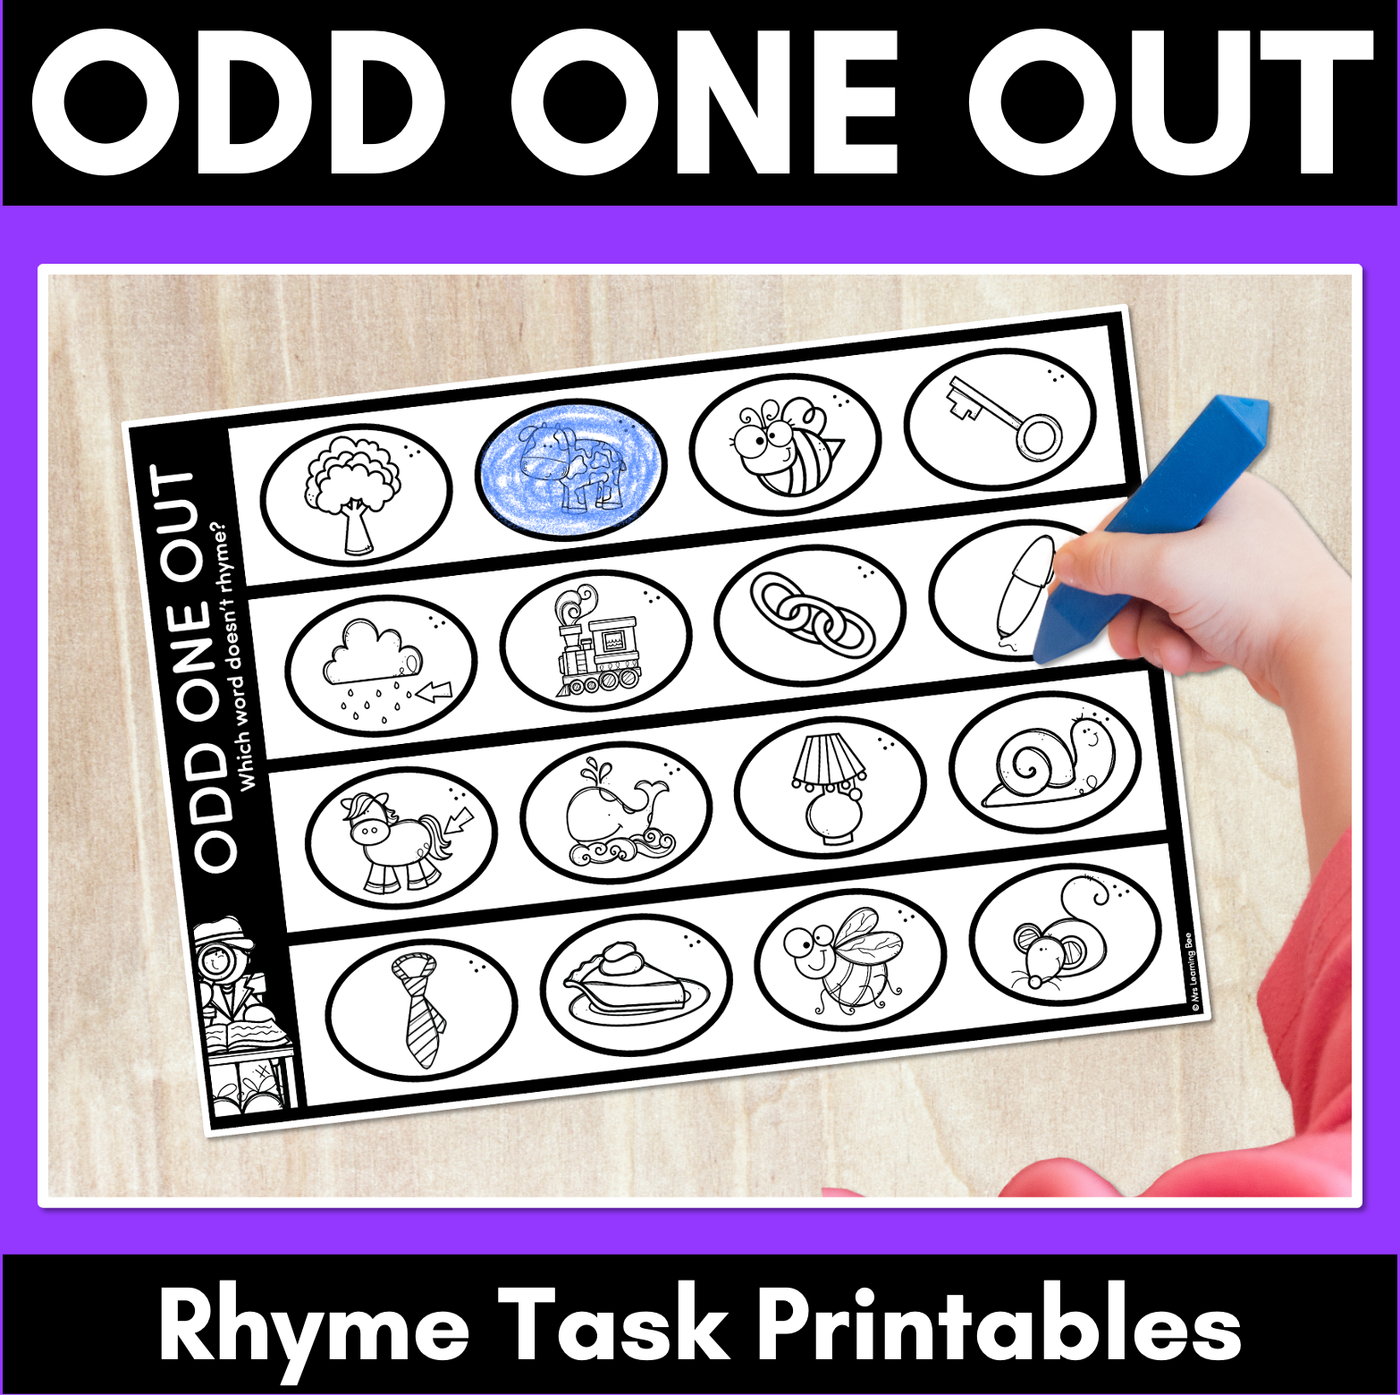 Odd One Out Rhyme Worksheets - Phonological Awareness Printables for RHYMING